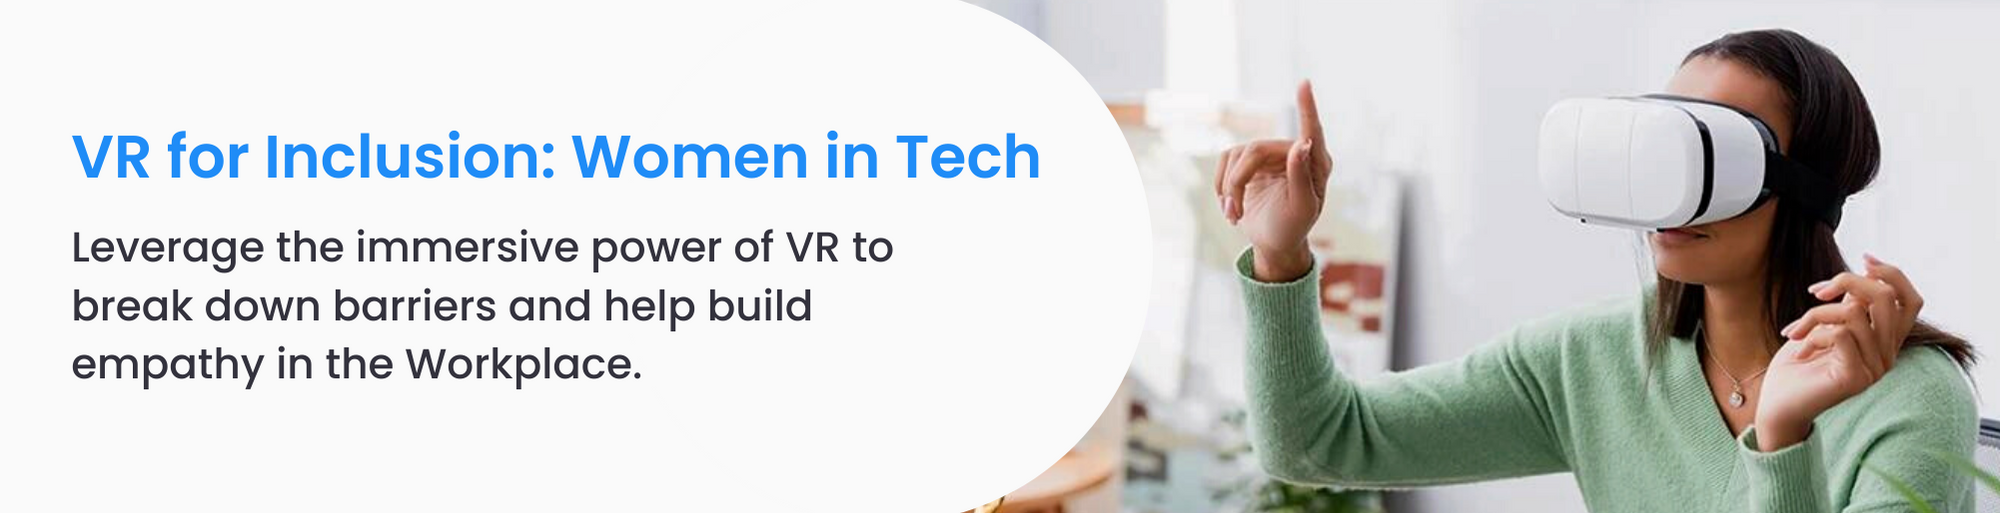 VR for Inclusion_Women in Tech-png